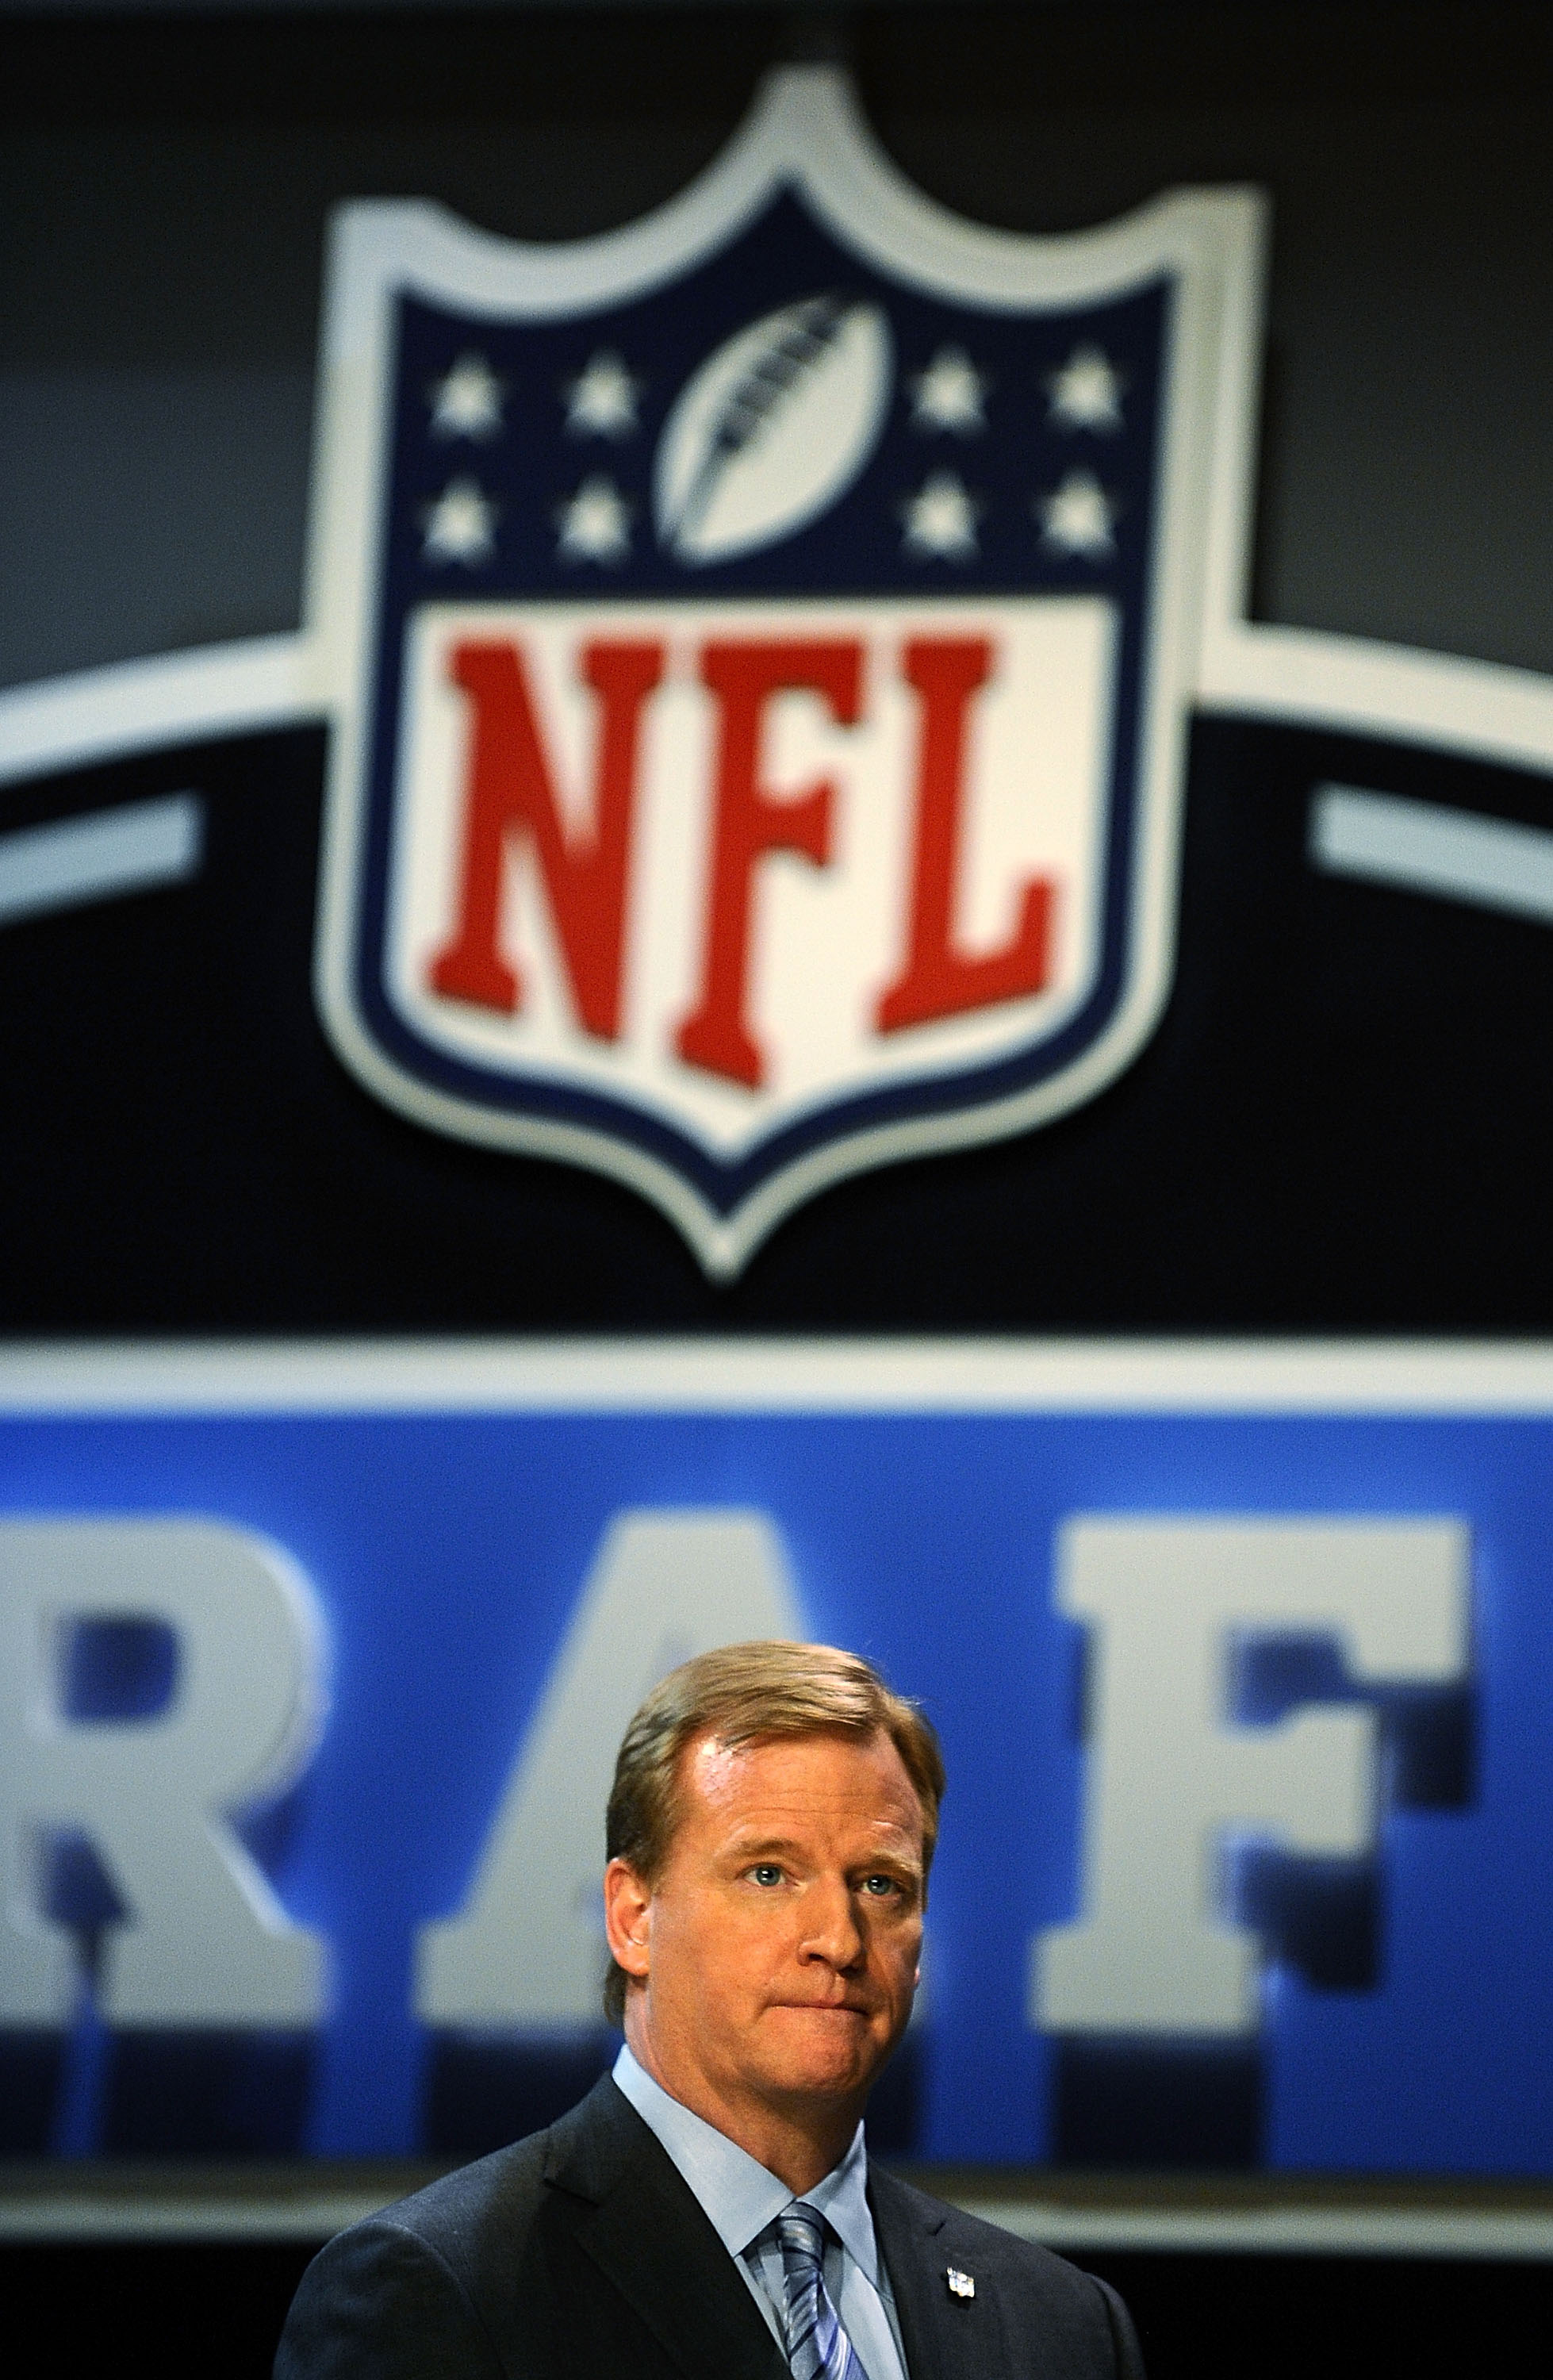 Analysis: Lack of specifics dooms NFL commissioner Roger Goodell's message